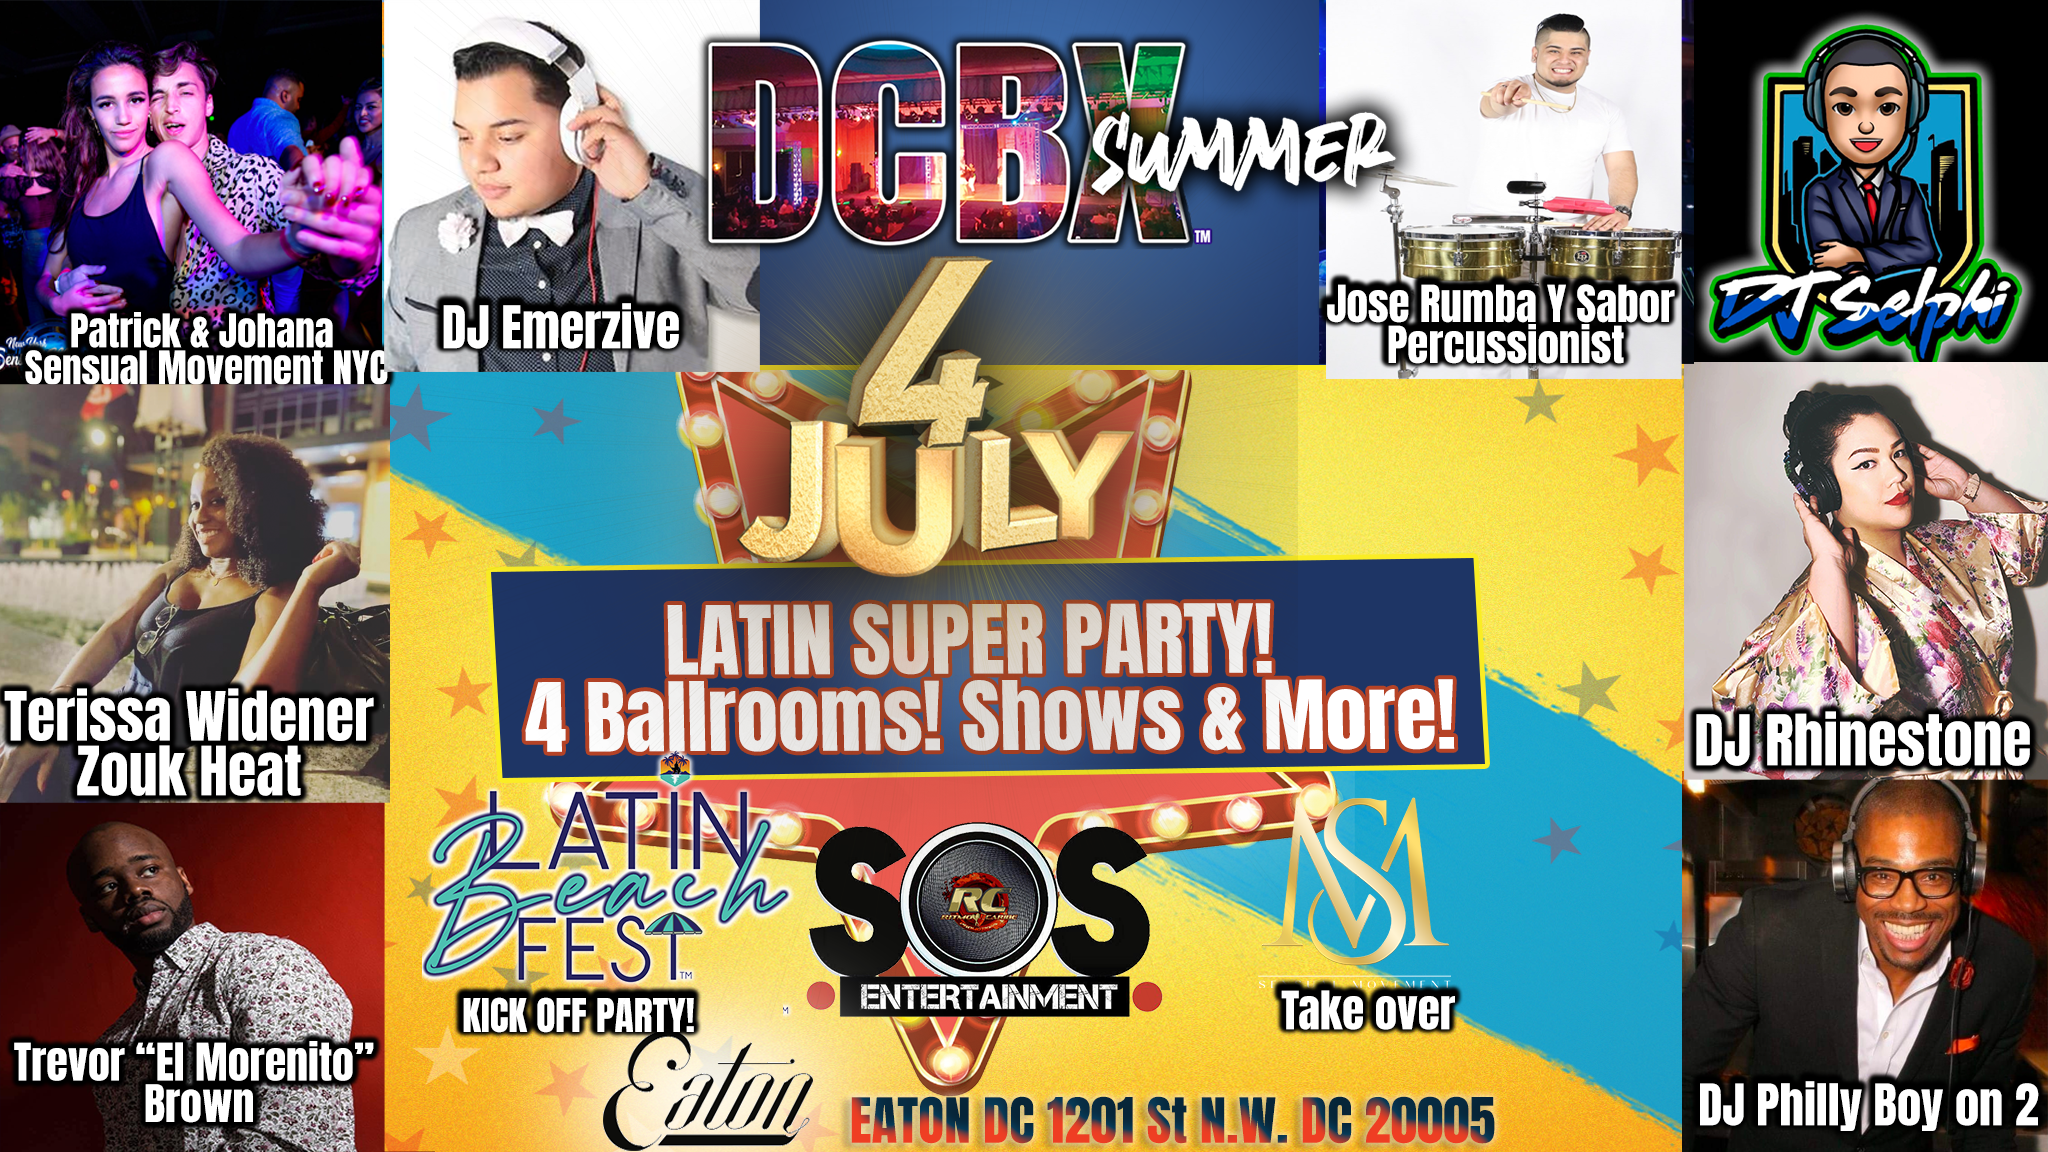 Photo for DCBX Summer July 4th Super Latin Bash! on ViewStub